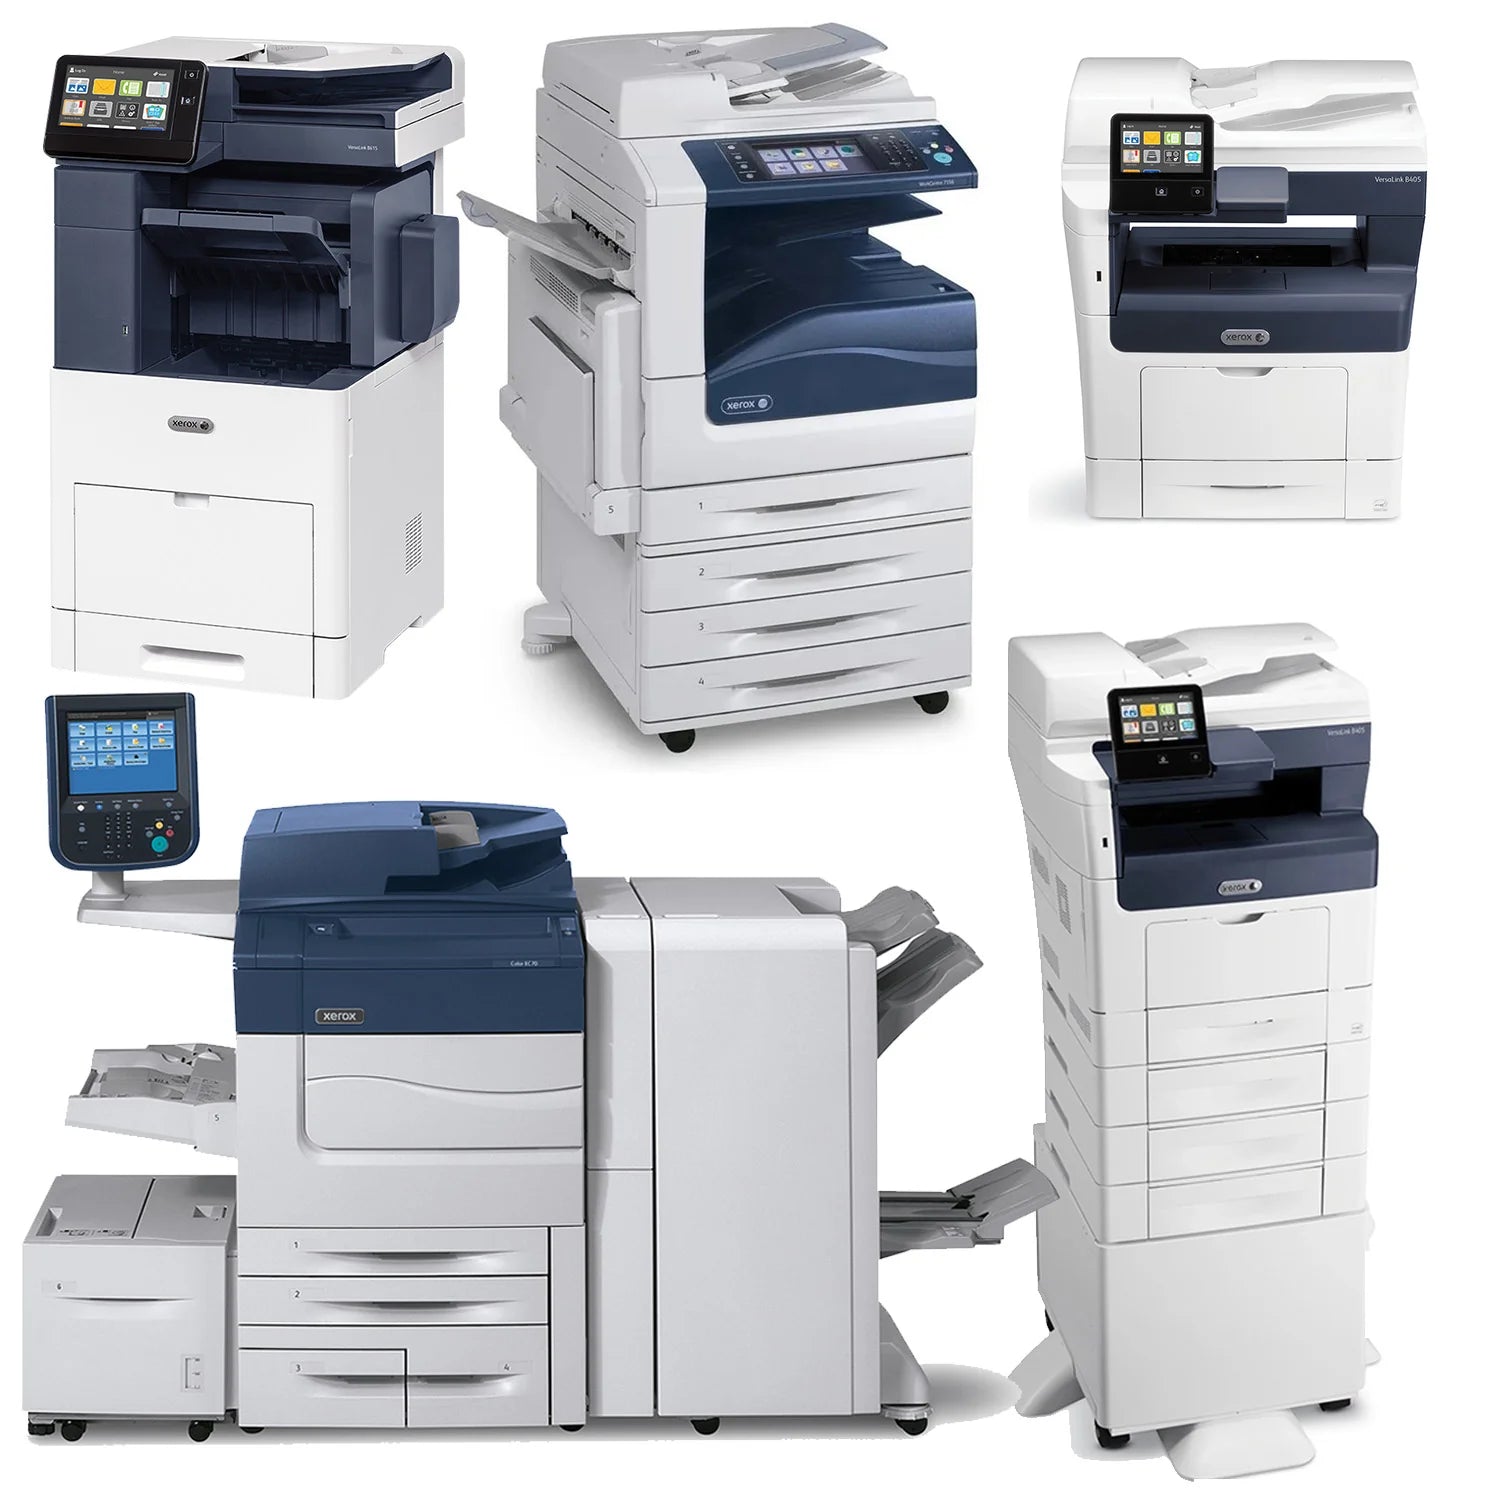 The Pros and Cons of Buying Used Copiers